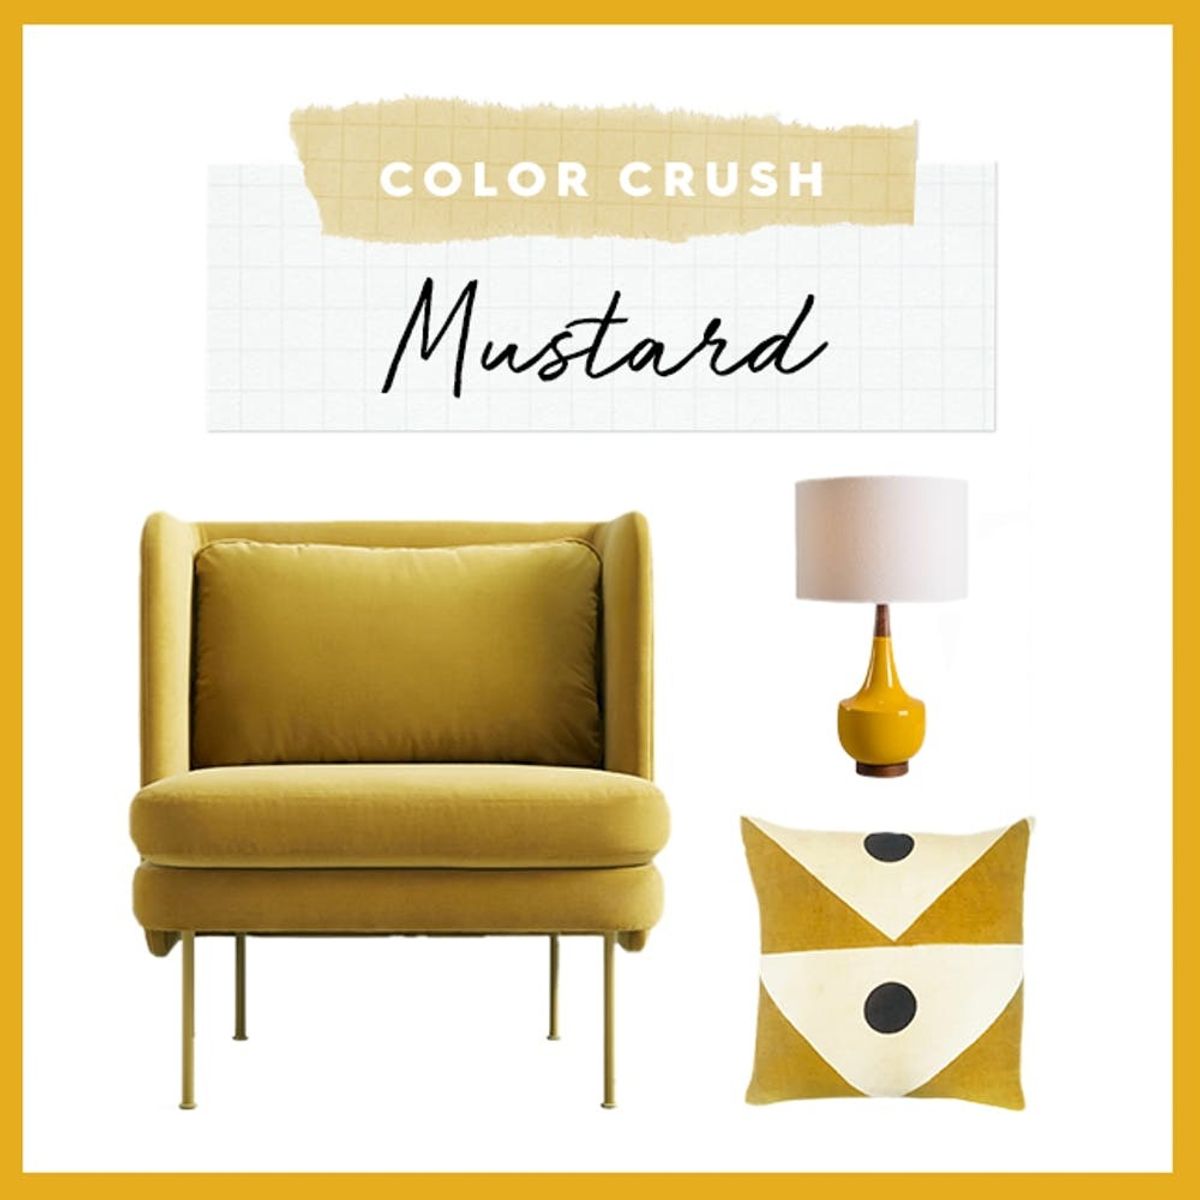 9 Magical Mustard Decor Finds for the Home